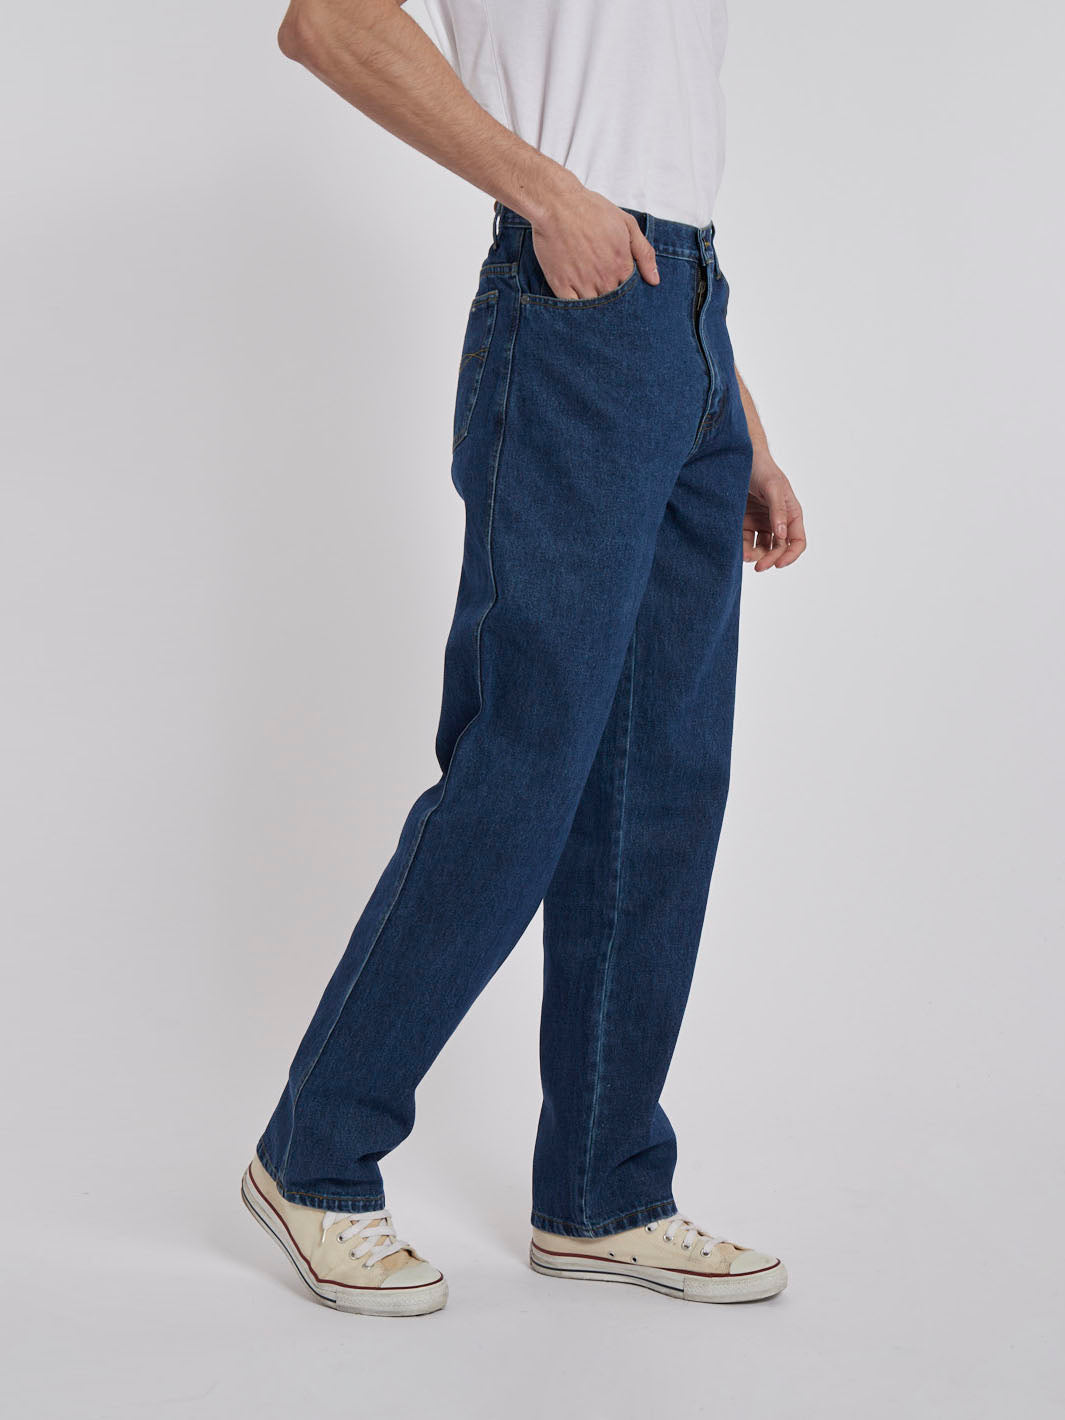 1990s Solid blue Cargo Jeans with 4 pockets and zipper closure